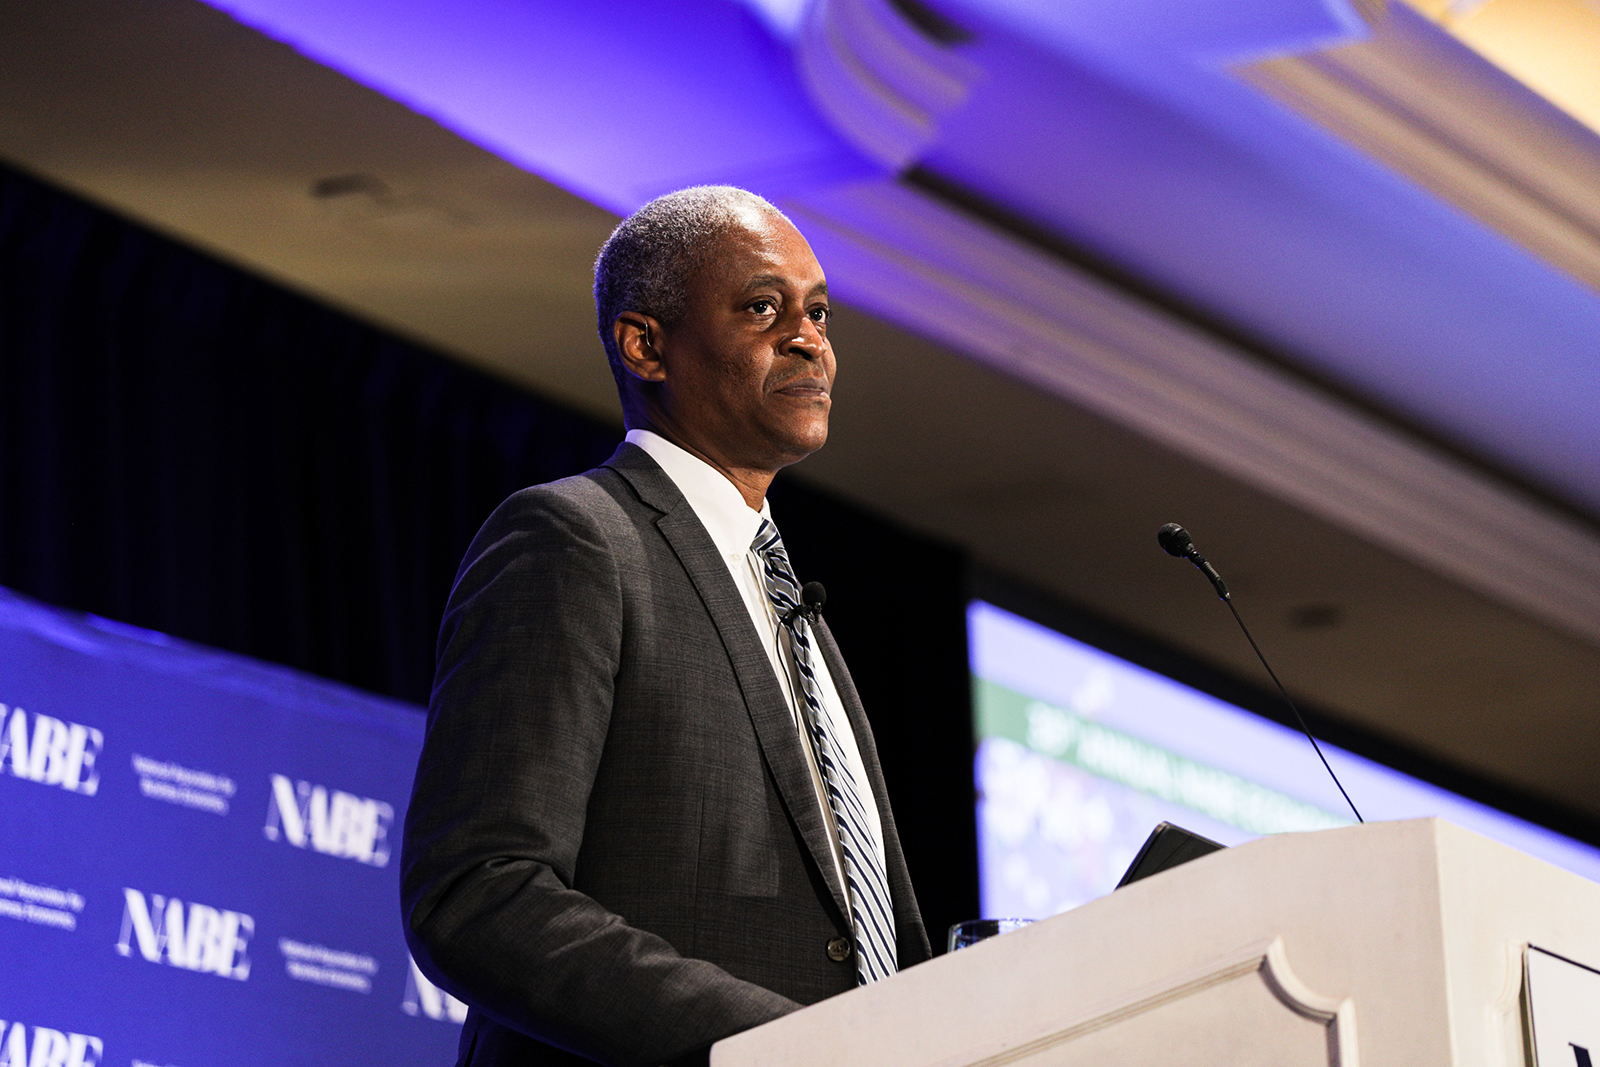 Raphael Bostic, president and chief executive officer of the Federal Reserve Bank of Atlanta, during the National Association of Business Economics (NABE) economic policy conference in Washington, D.C, on March 21.